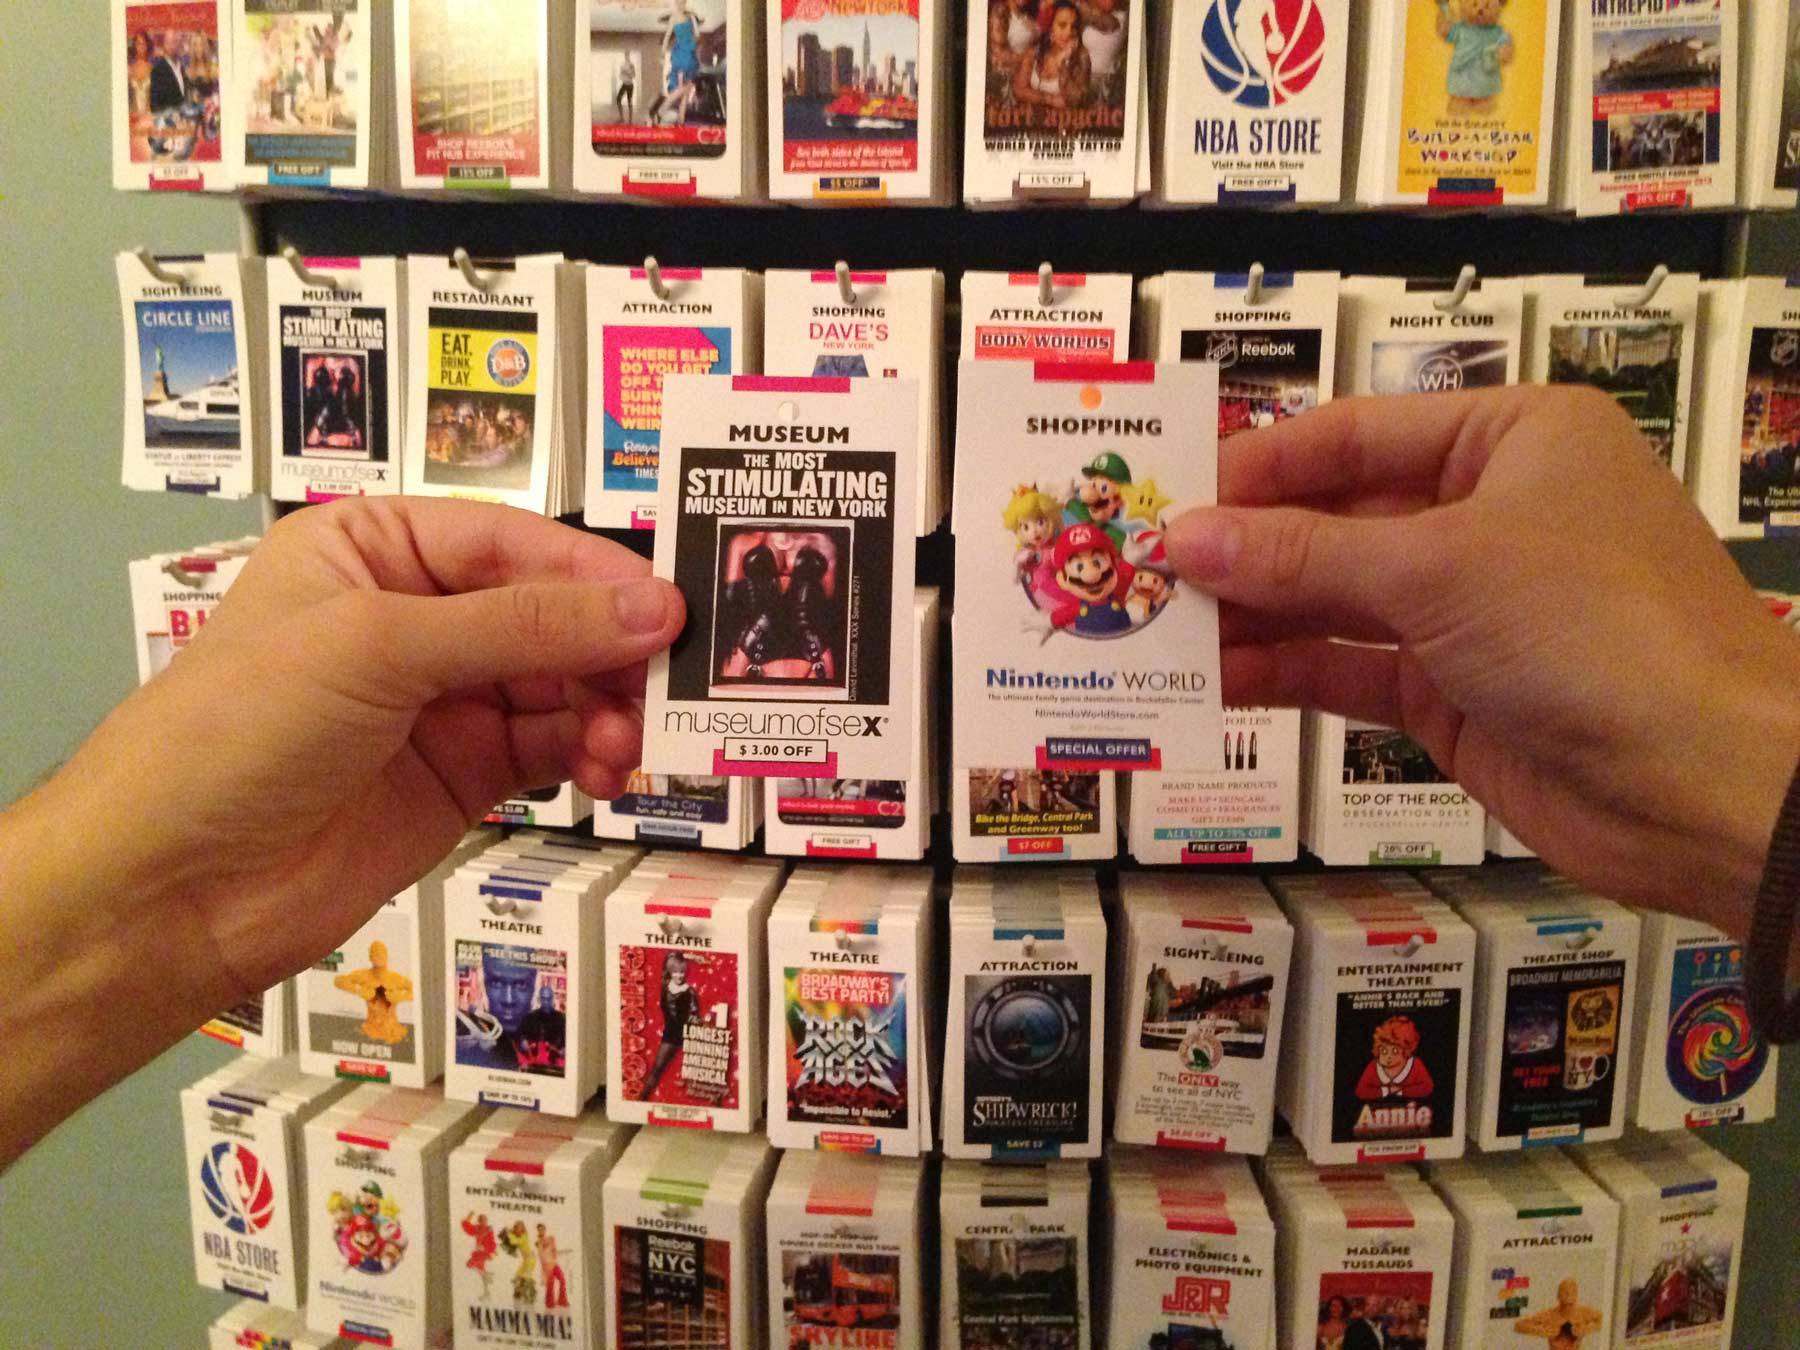 Richard holding a Museum of Sex ad, while I hold a Nintendo World ad